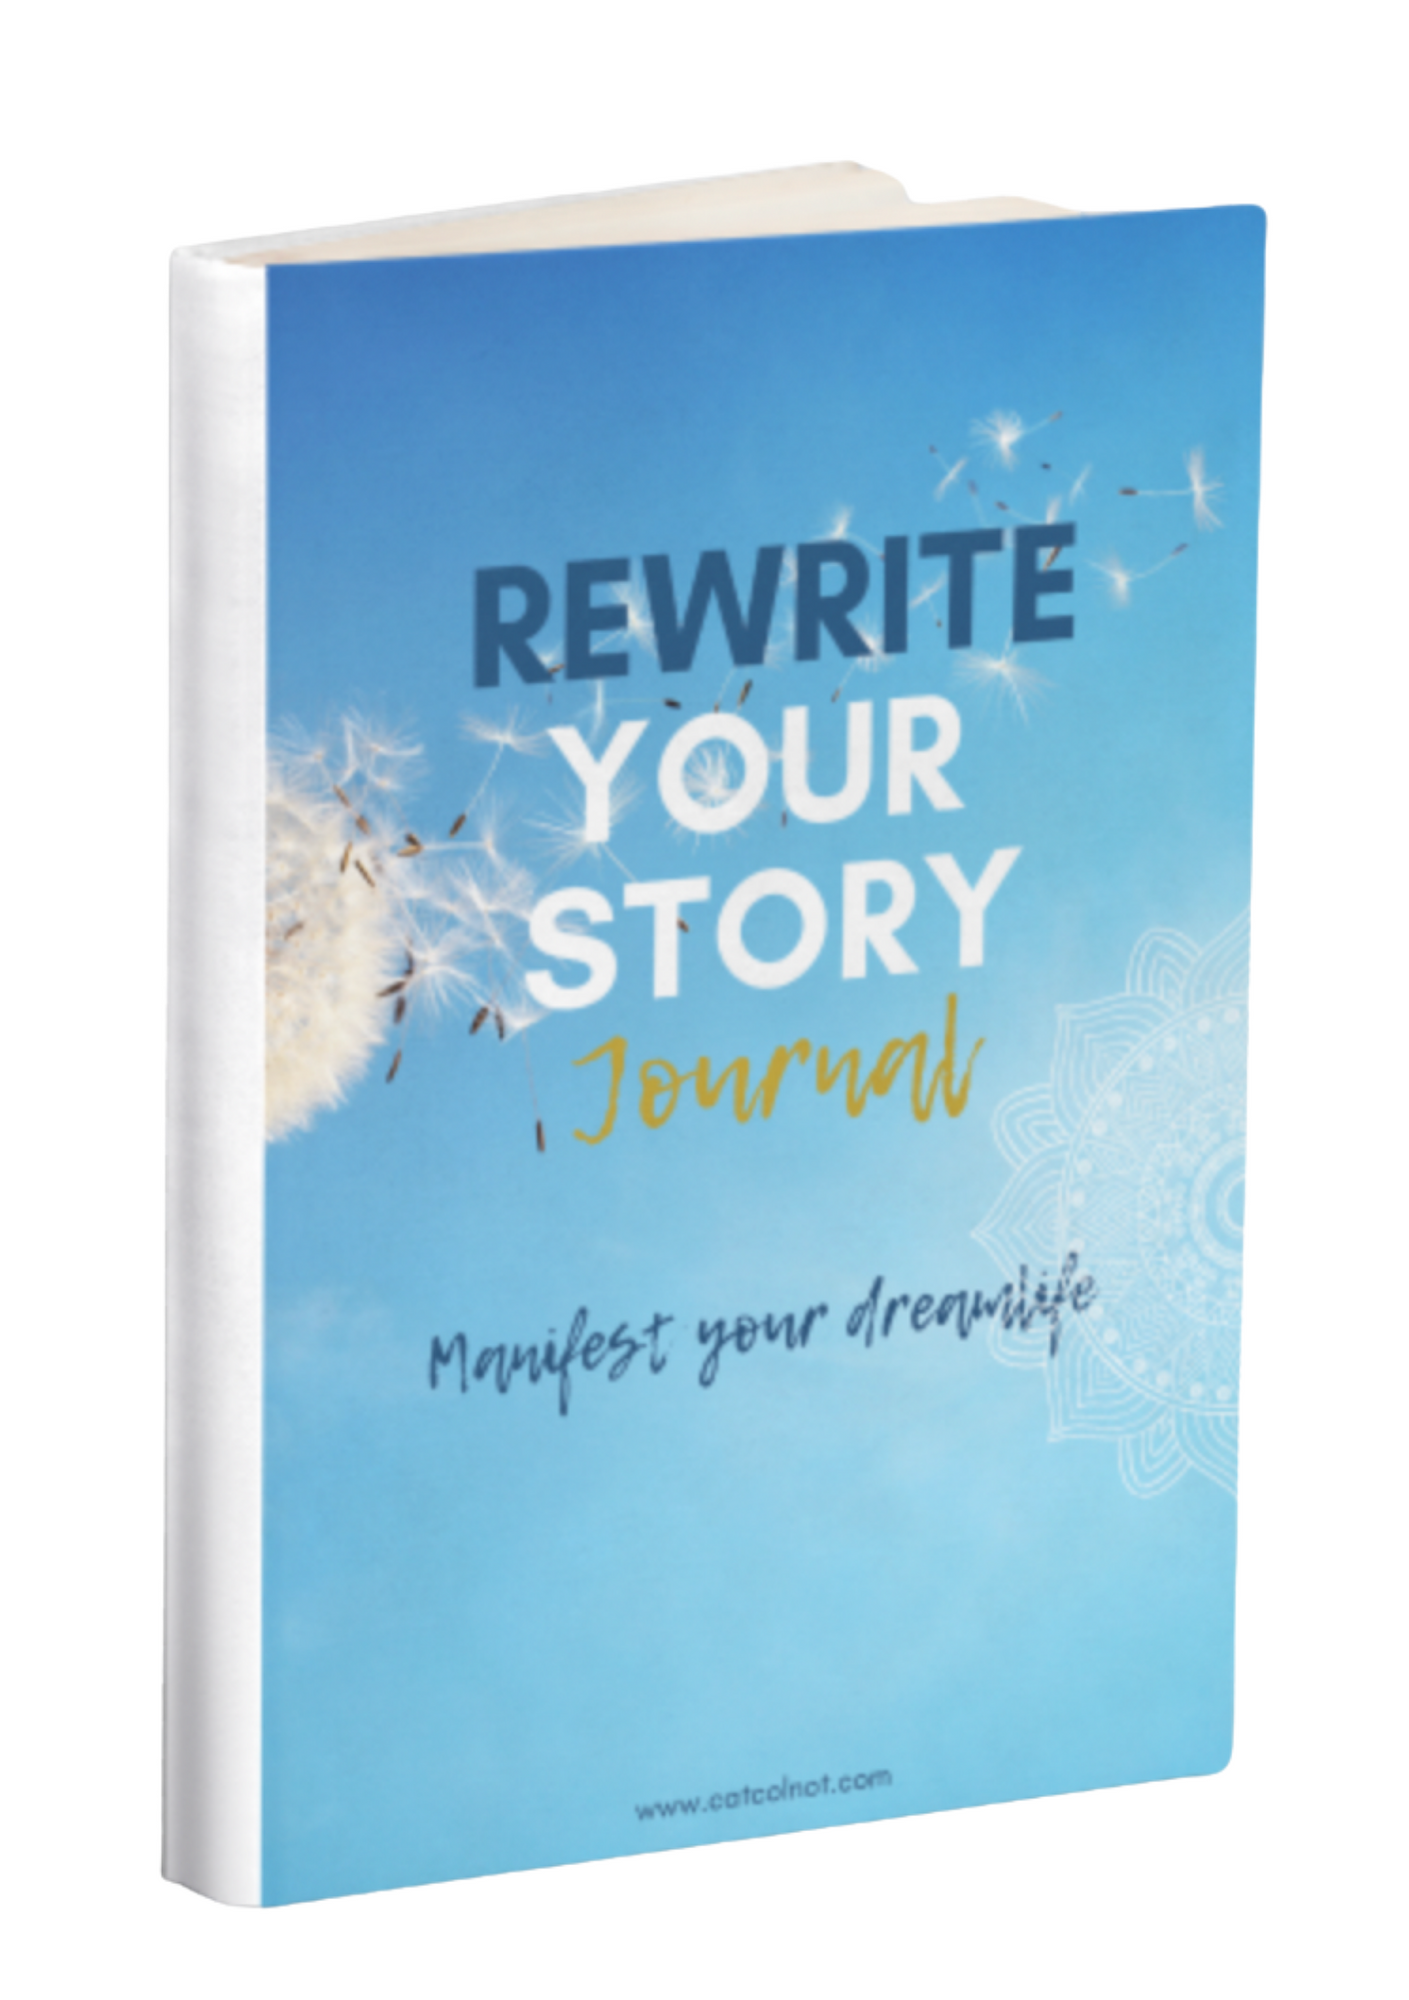 Rewrite Your Story e-book (cover mockup)